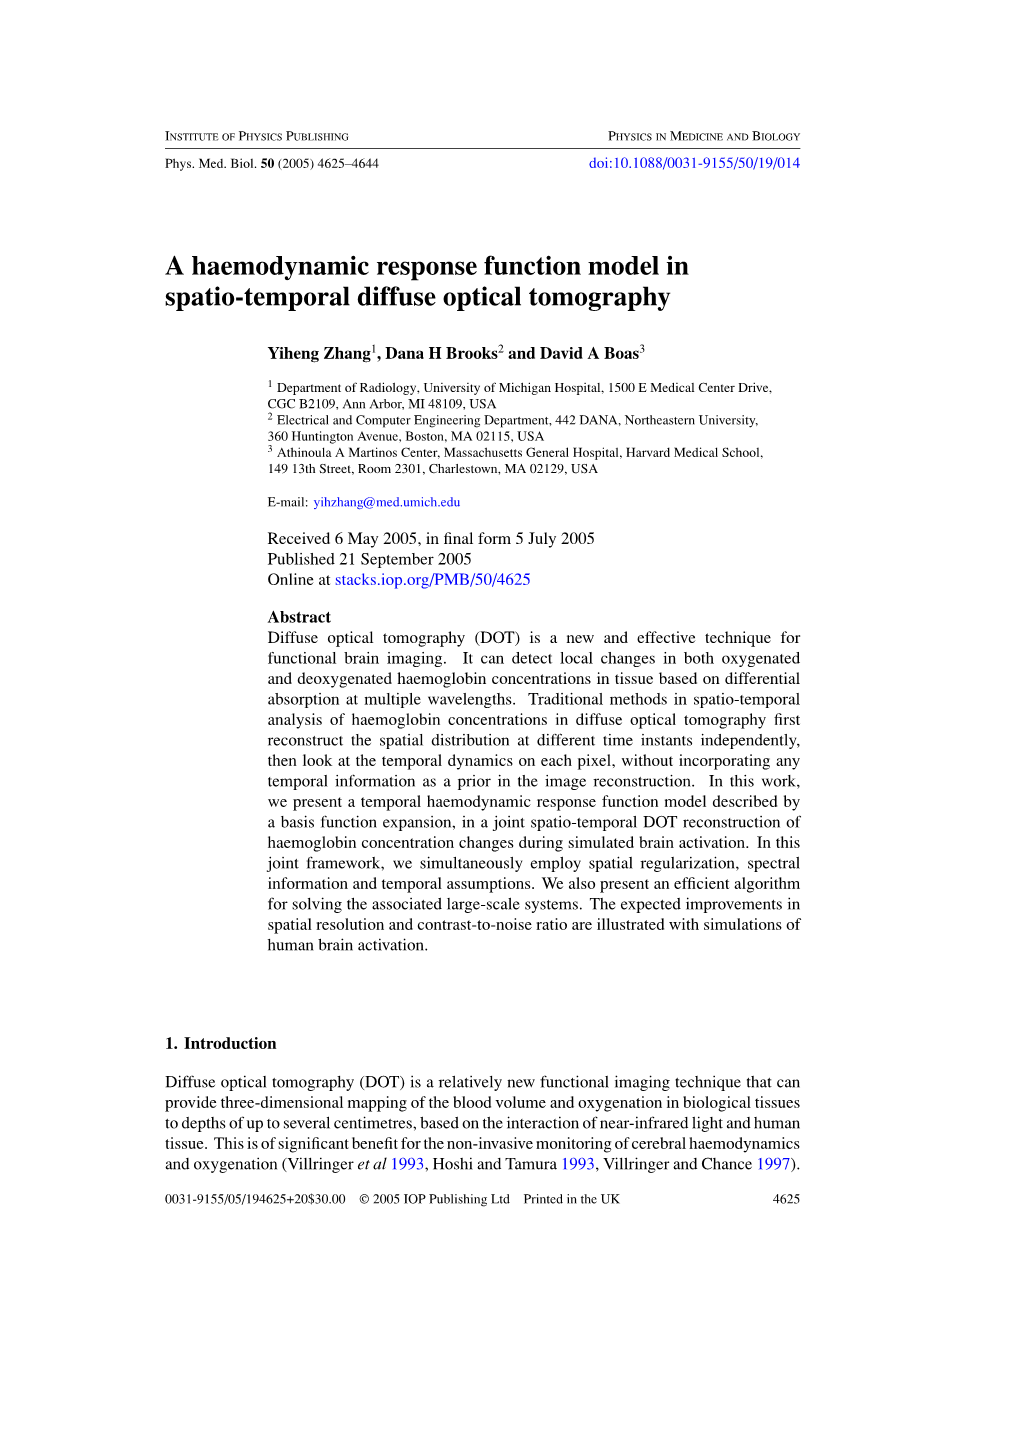 A Haemodynamic Response Function Model in Spatio-Temporal Diffuse Optical Tomography